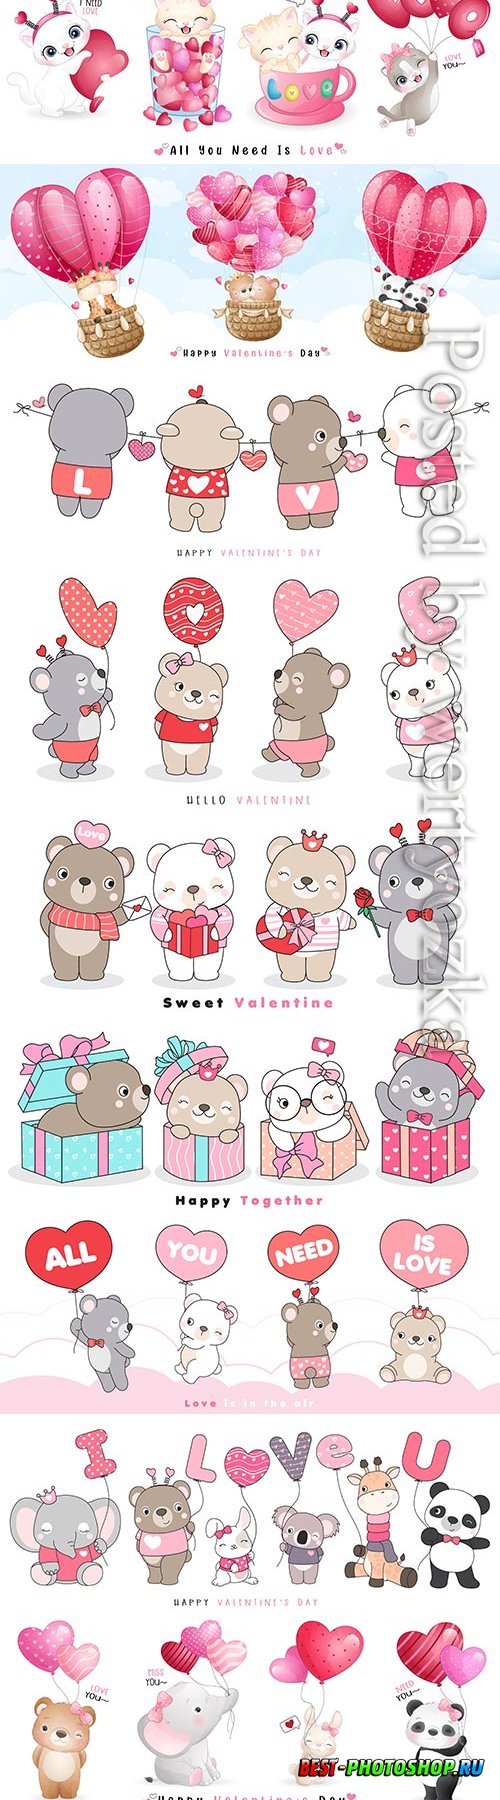 Cute funny doodle animals for valentine's day illustration